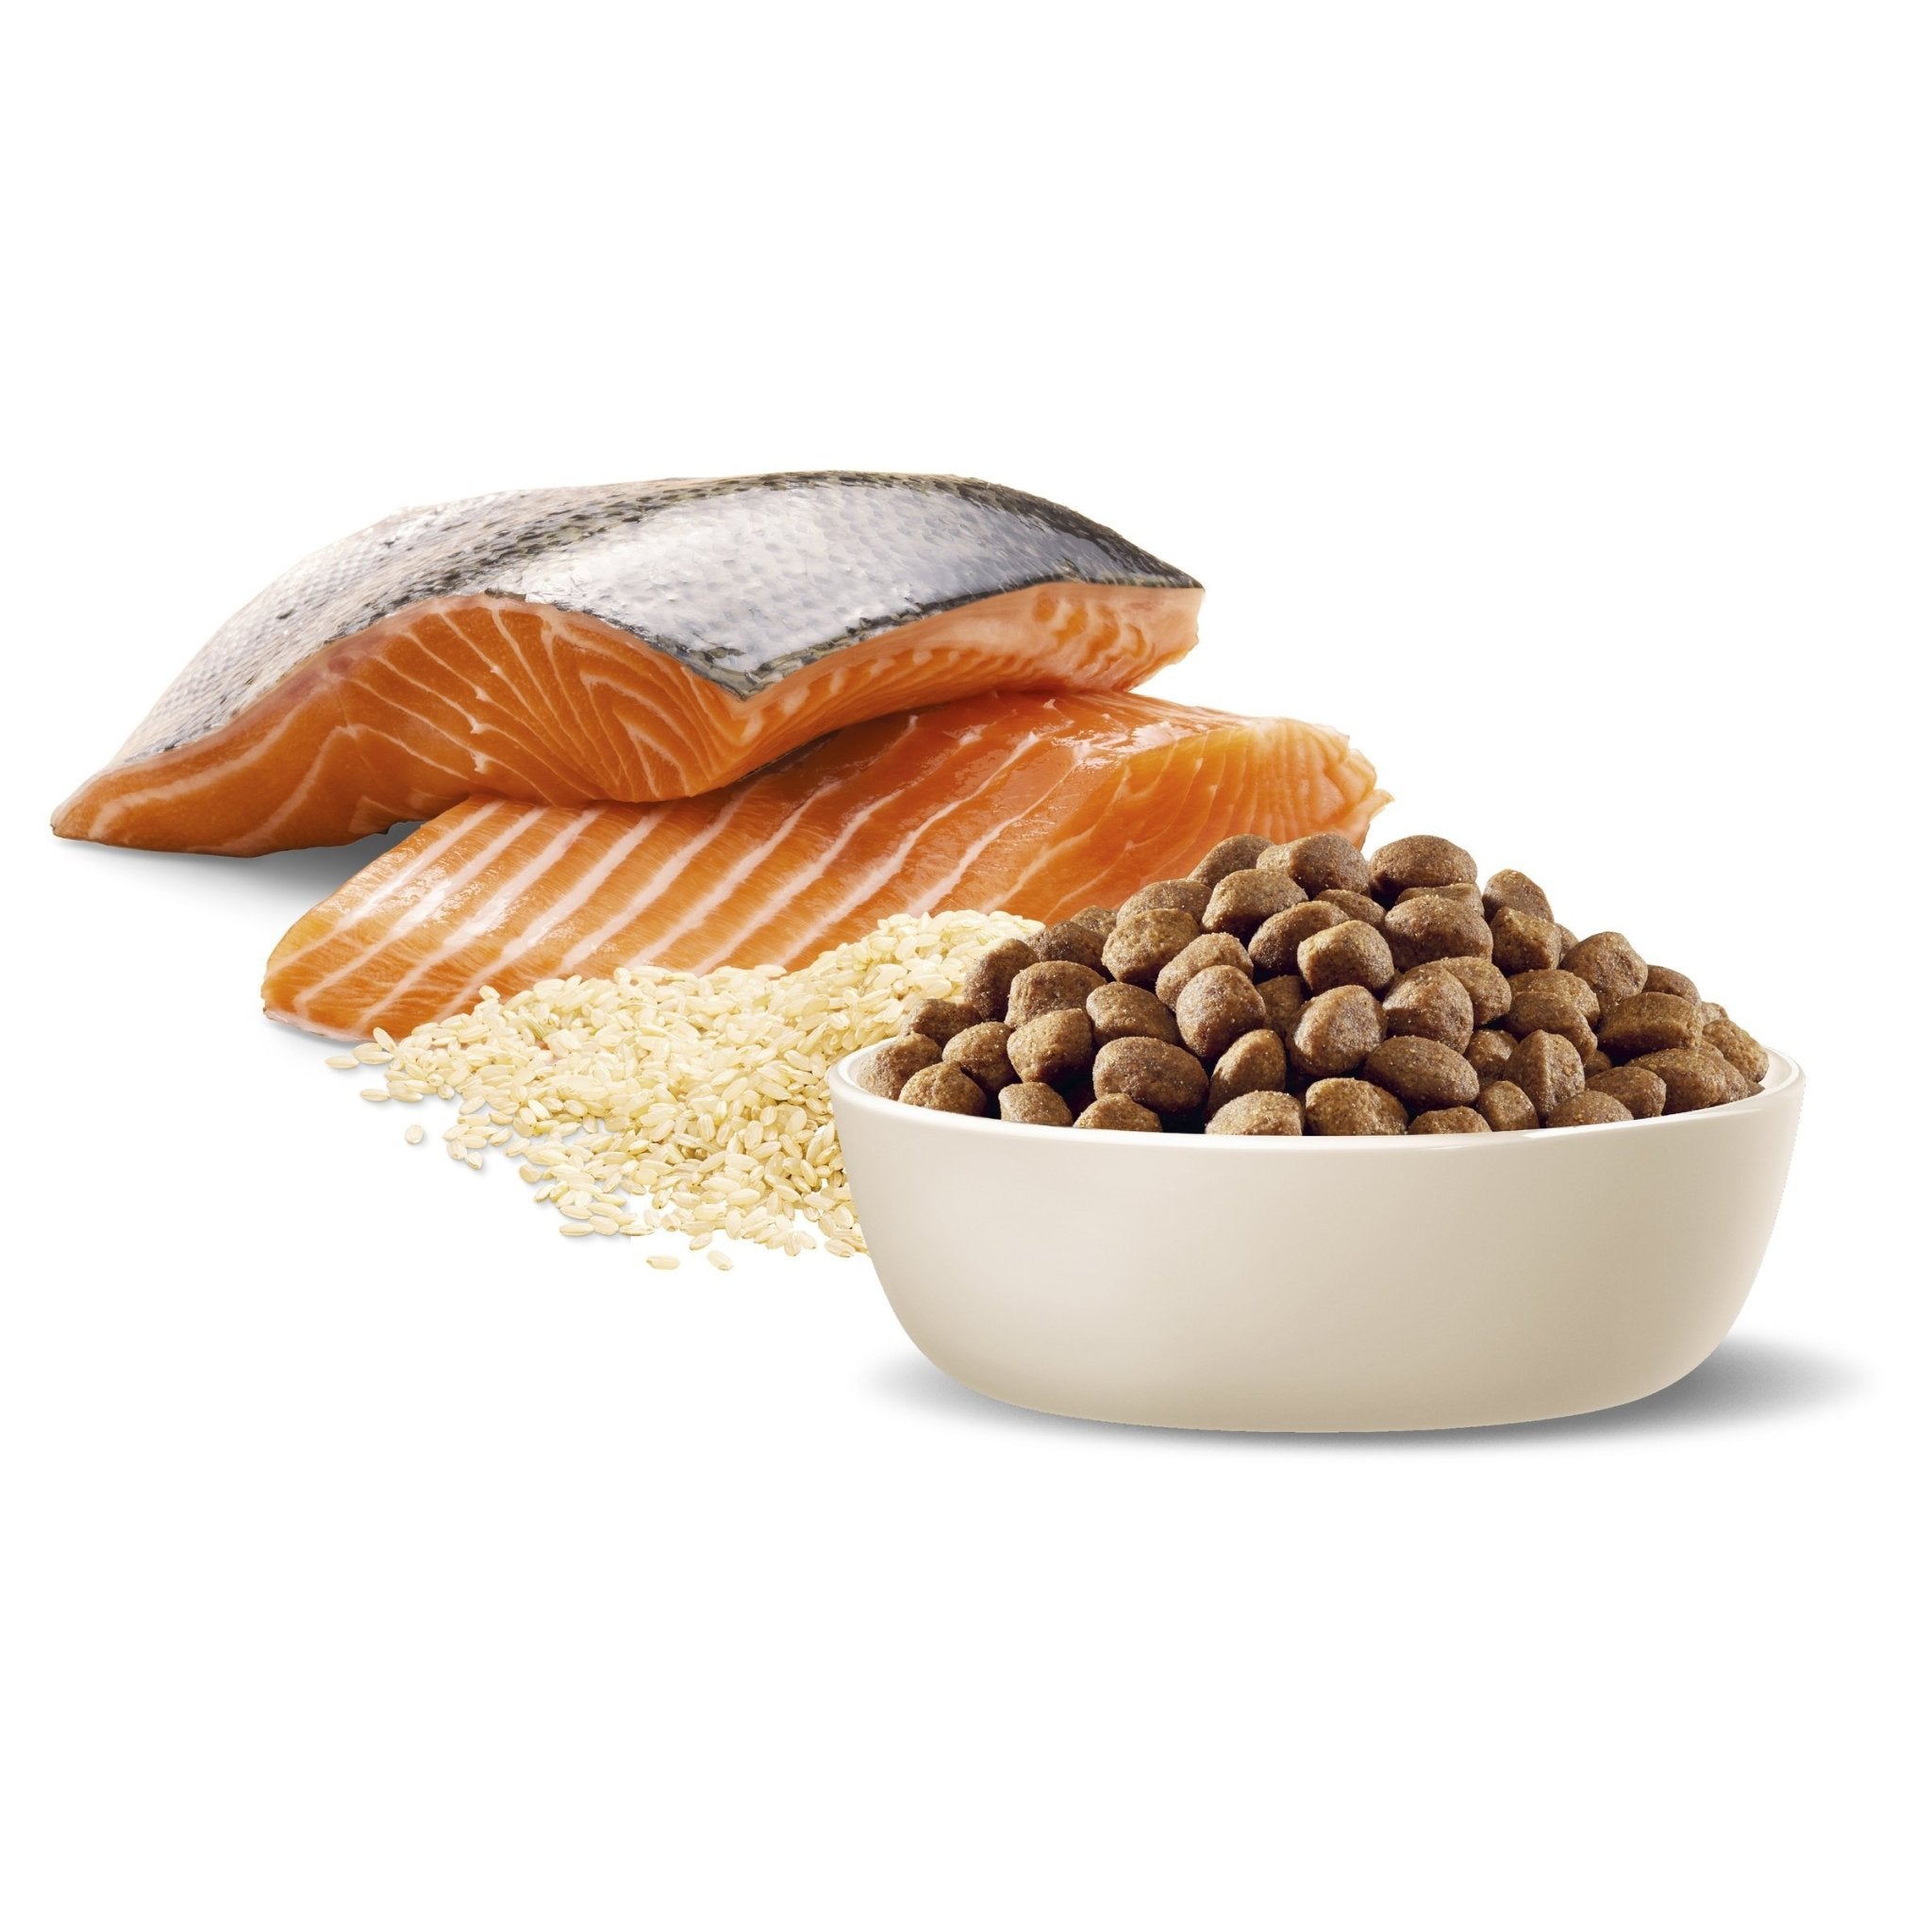 ADVANCE Large Oodles Dry Dog Food Salmon with Rice